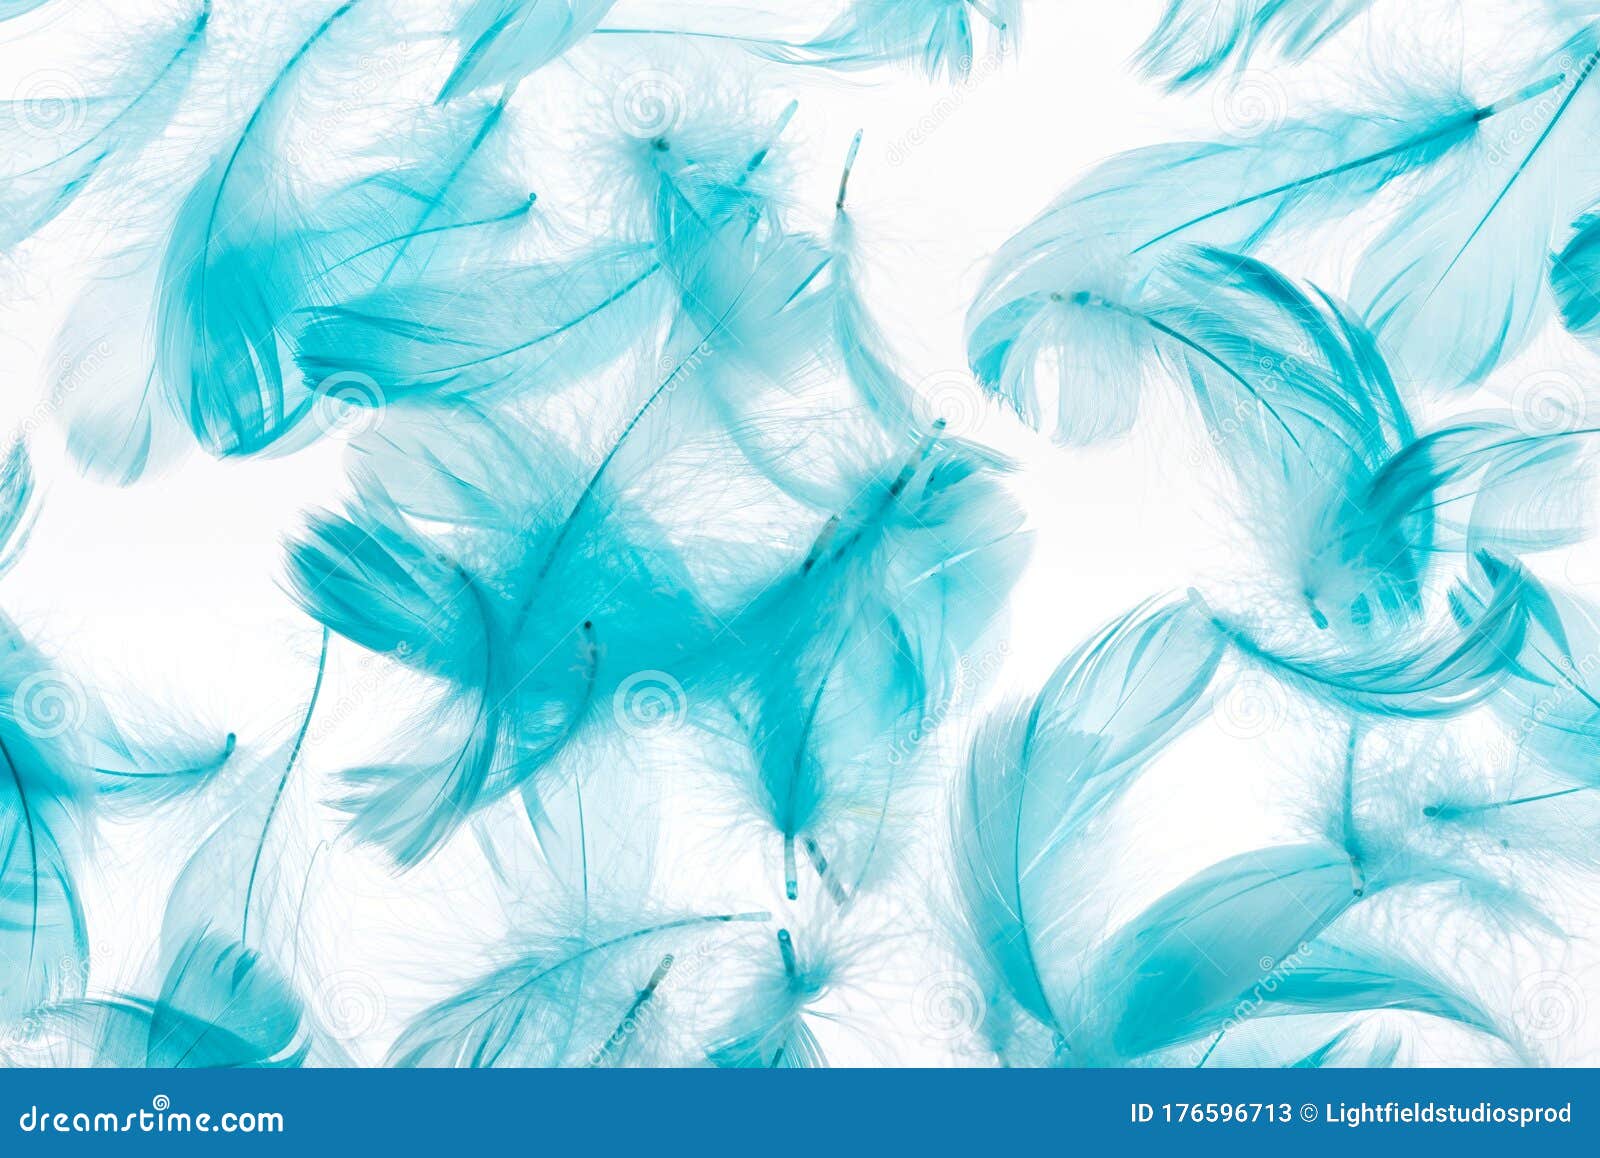 Seamless Background with Blue Feathers Isolated on White. Stock Image ...